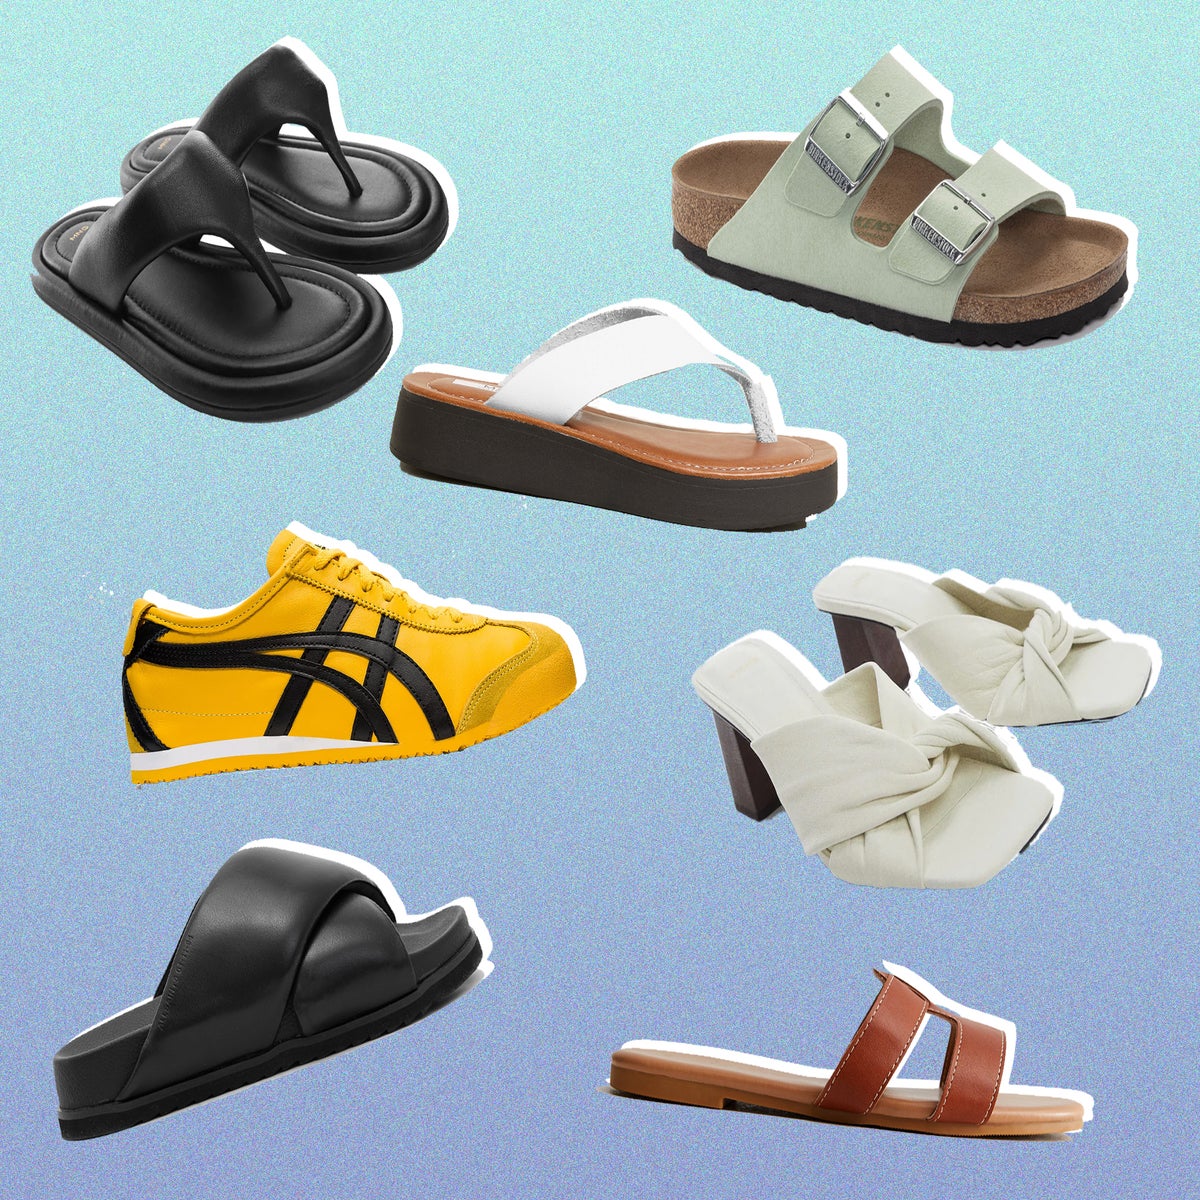 Best women's summer shoes: Sandals, trainers, clogs and more